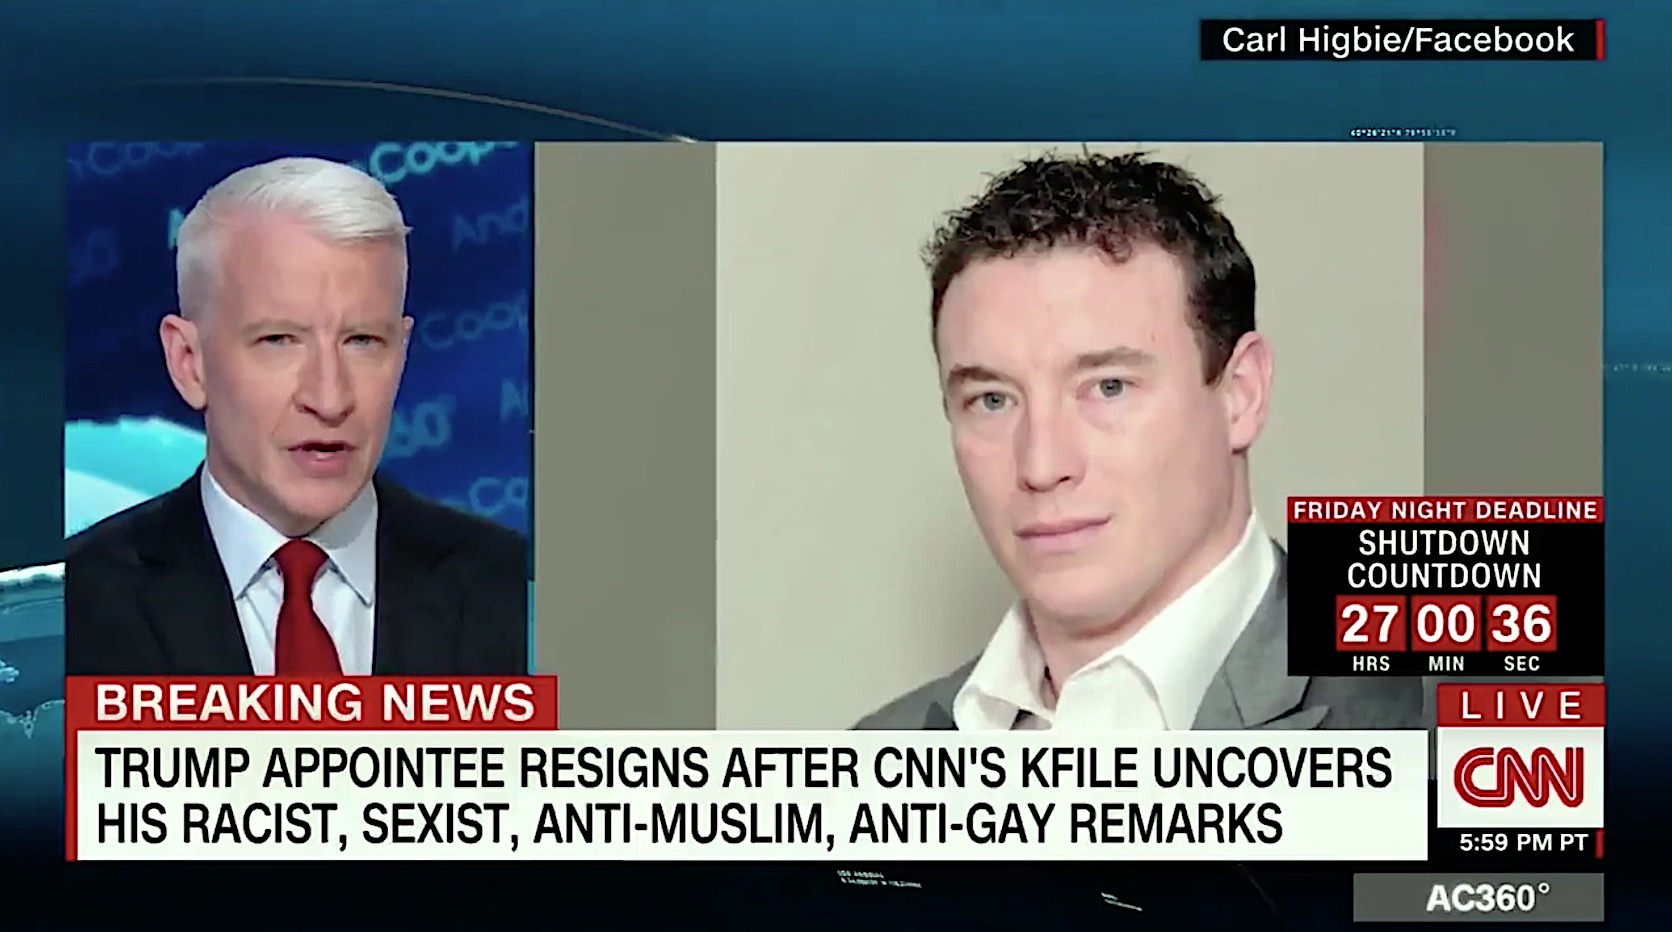 Carl Higbie resigns after controversial comments surface